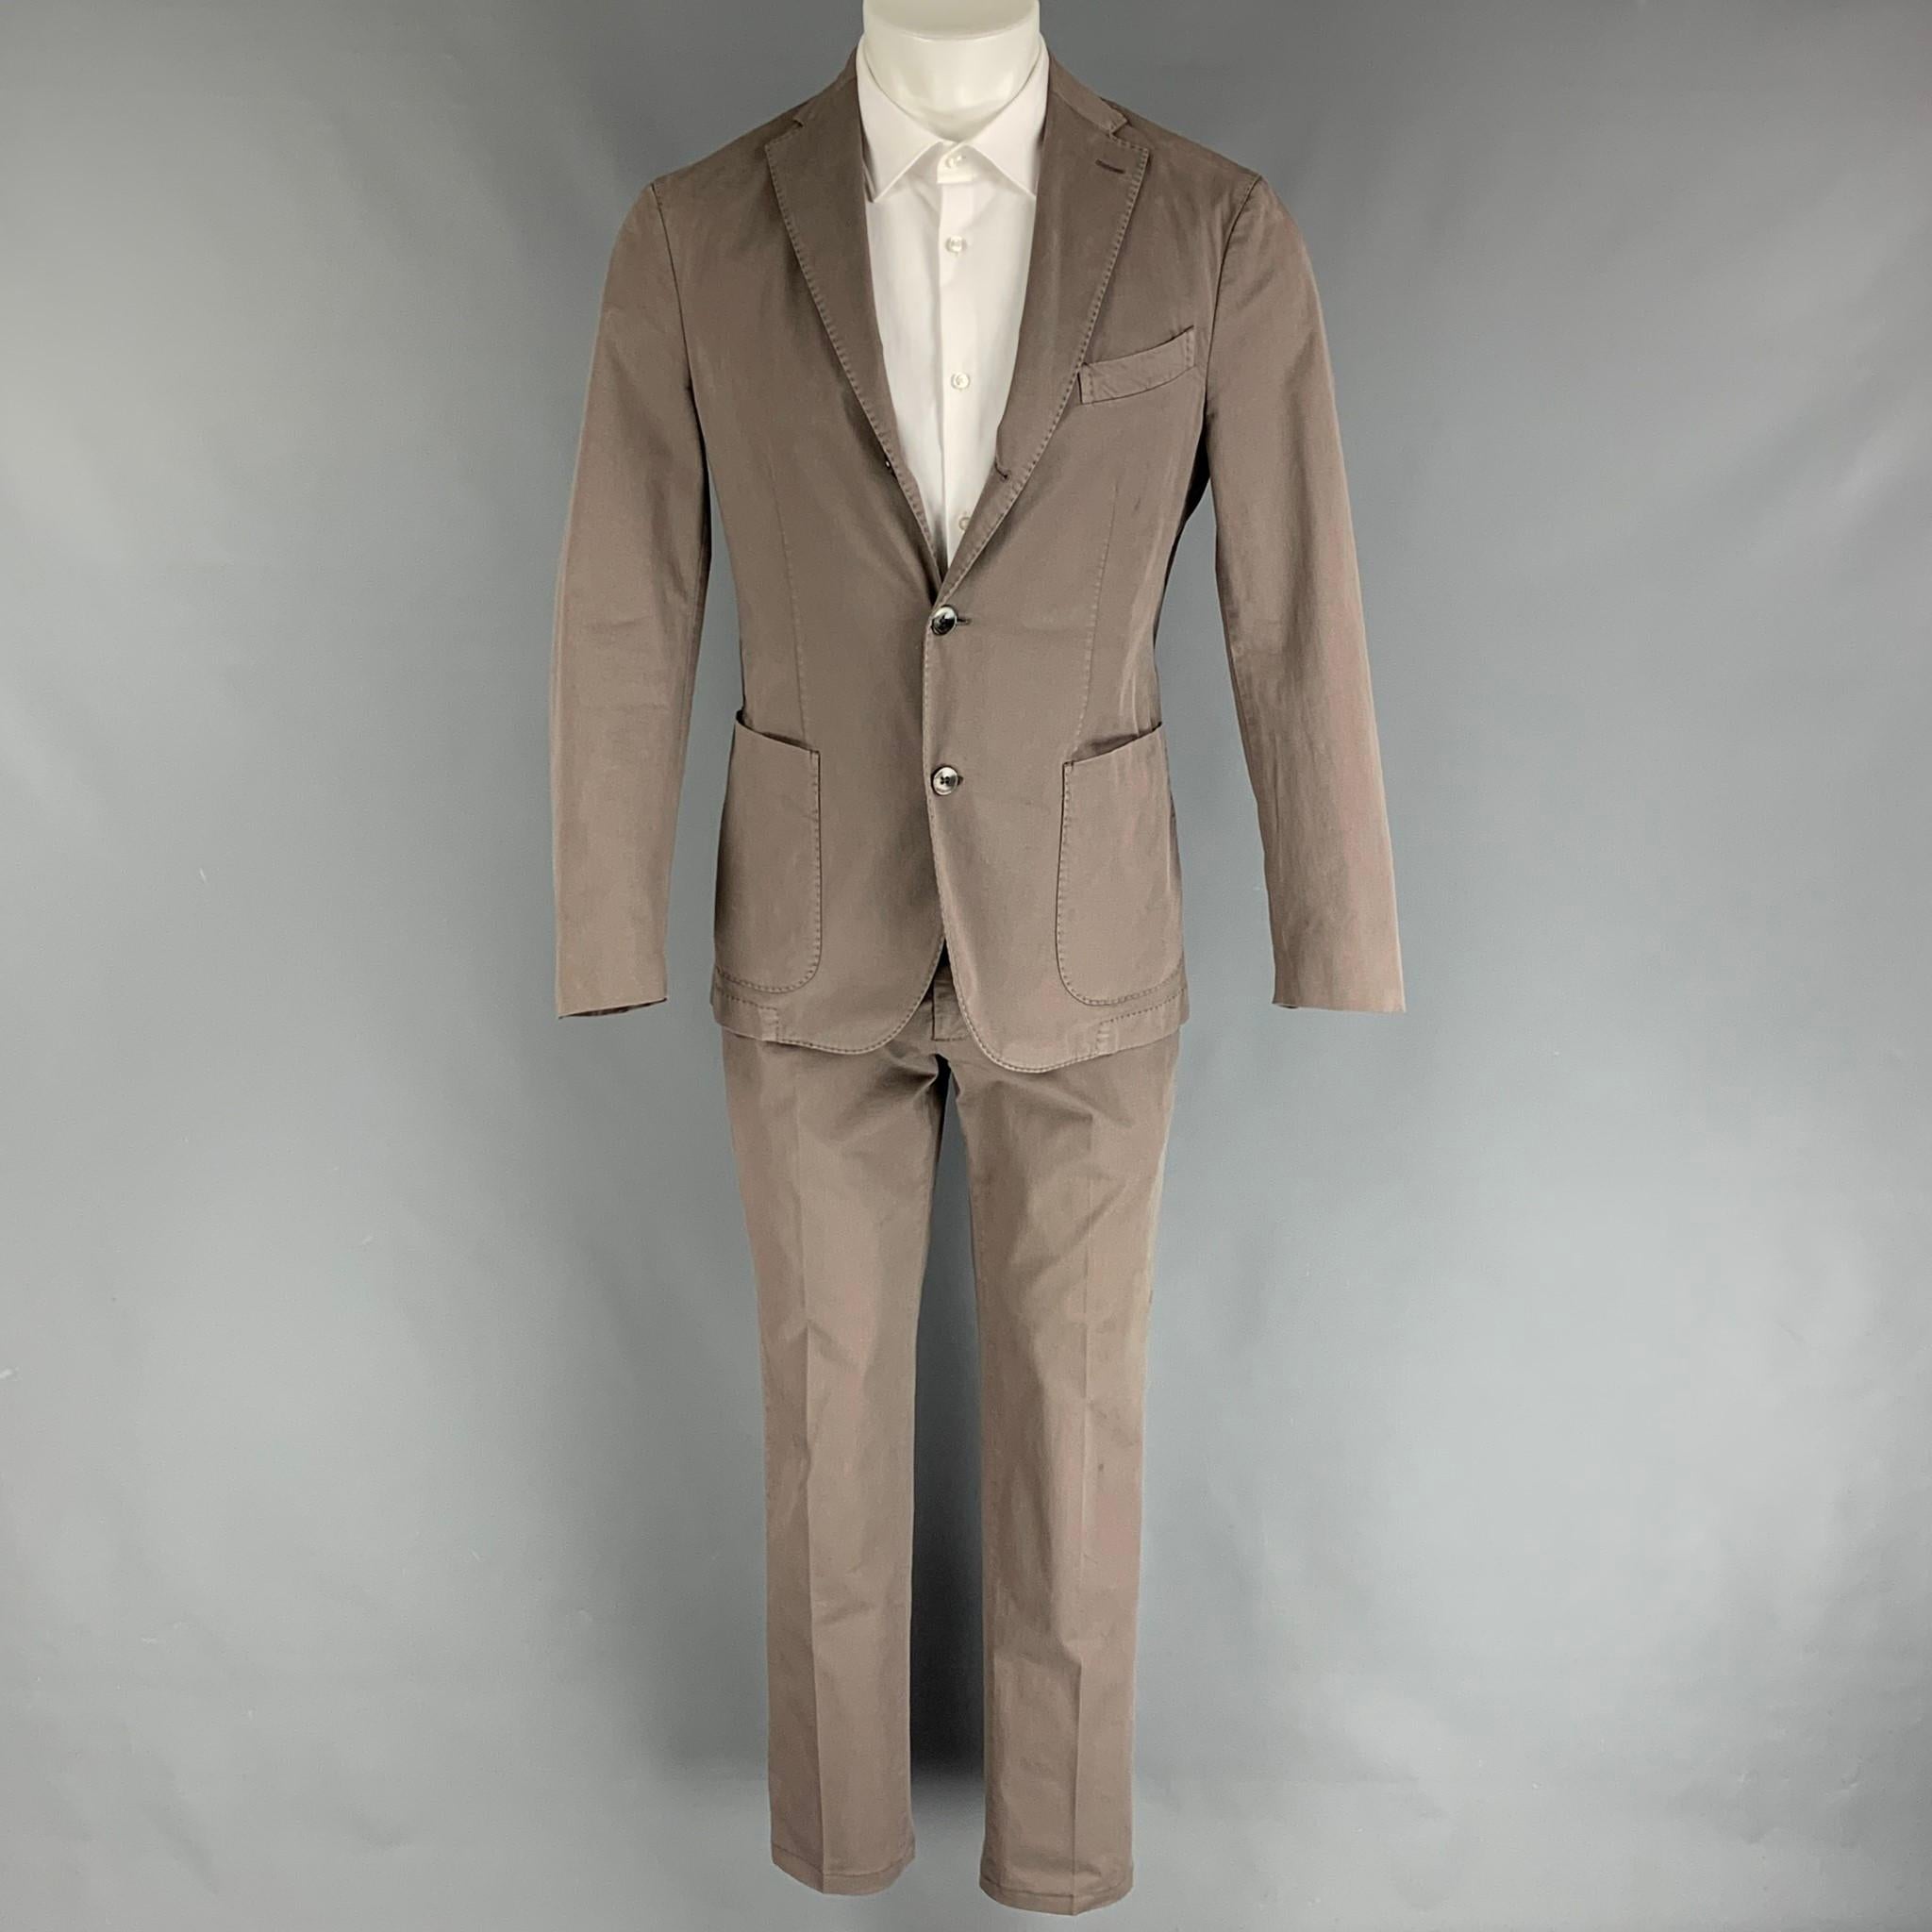 BOGLIOLI suit comes in a grey cotton and includes a single breasted, three button sport coat with a notch lapel and matching flat front trousers.

Very Good Pre-Owned Condition.
Marked: 46
Original Retail Price: